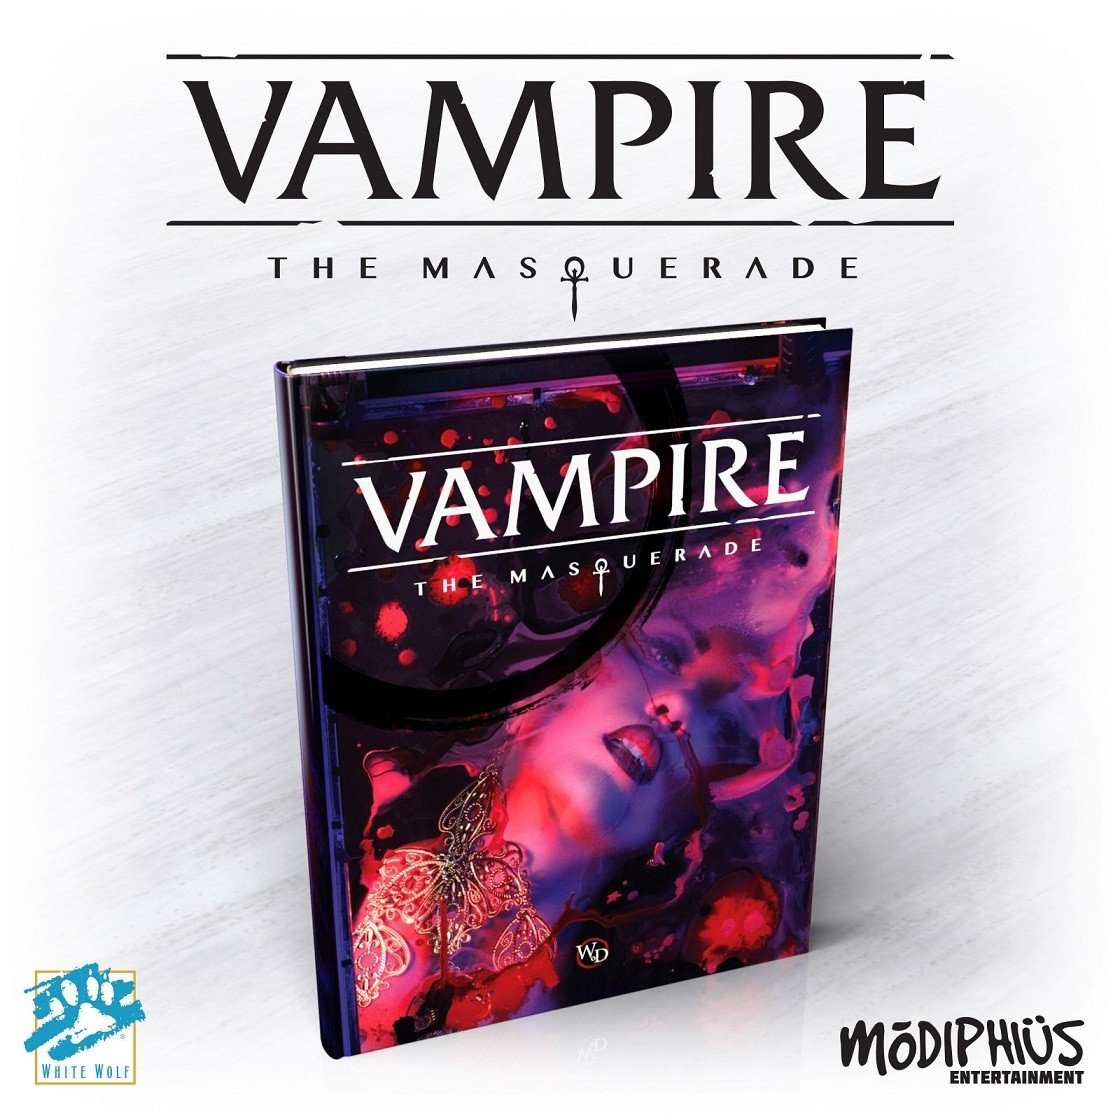 Community Forums: Vampire: The Masquerade 5th Edition by Roll20